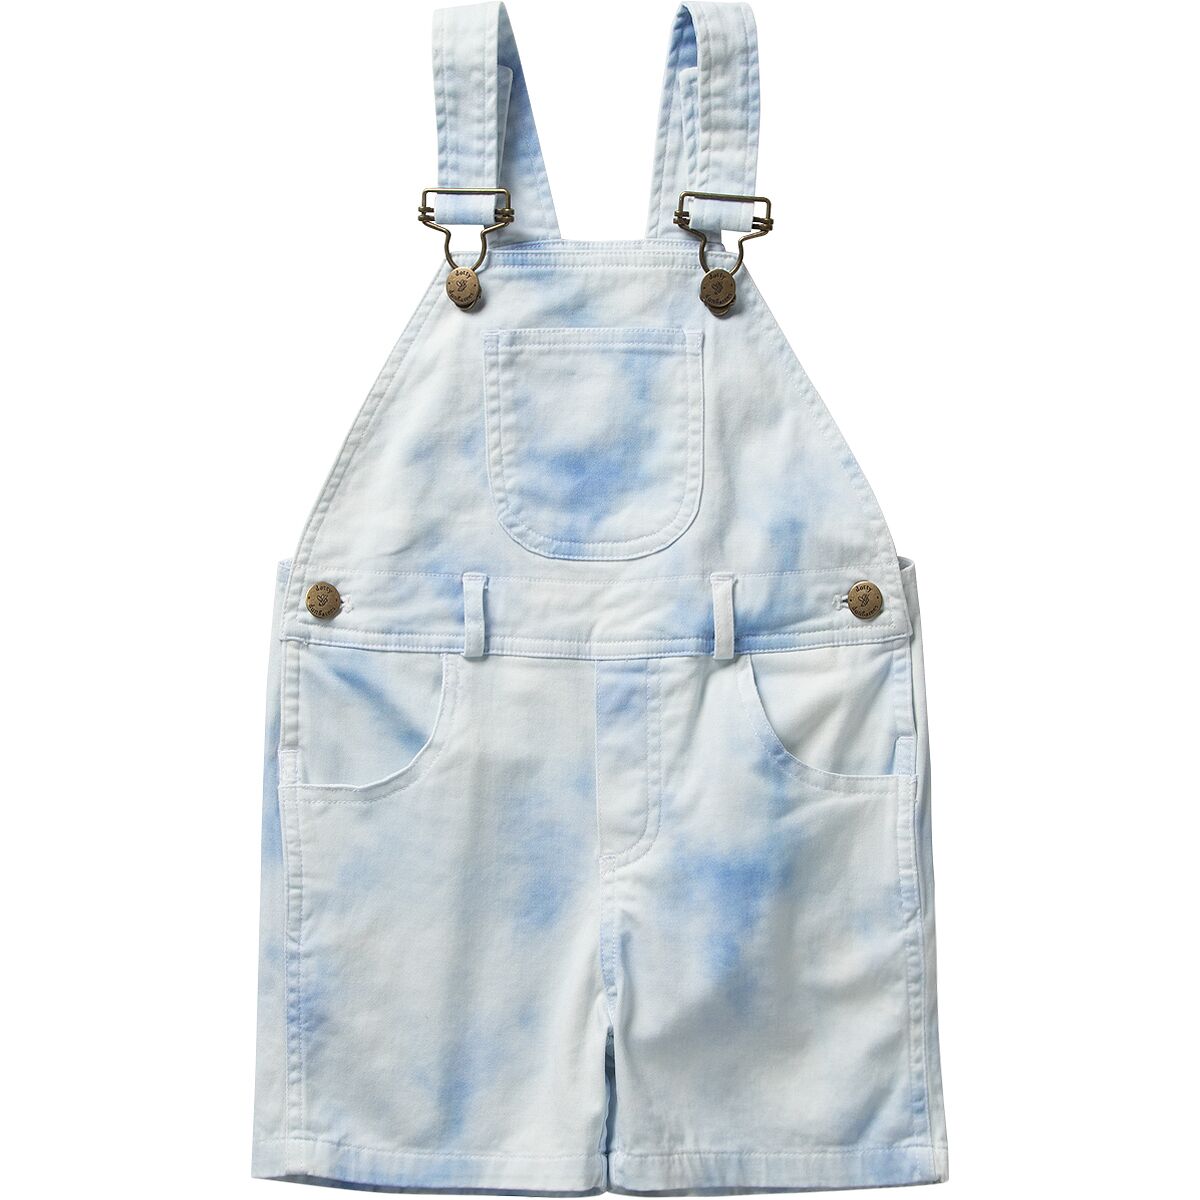 Dotty Dungarees Tie Dye Blue Short - Toddlers'